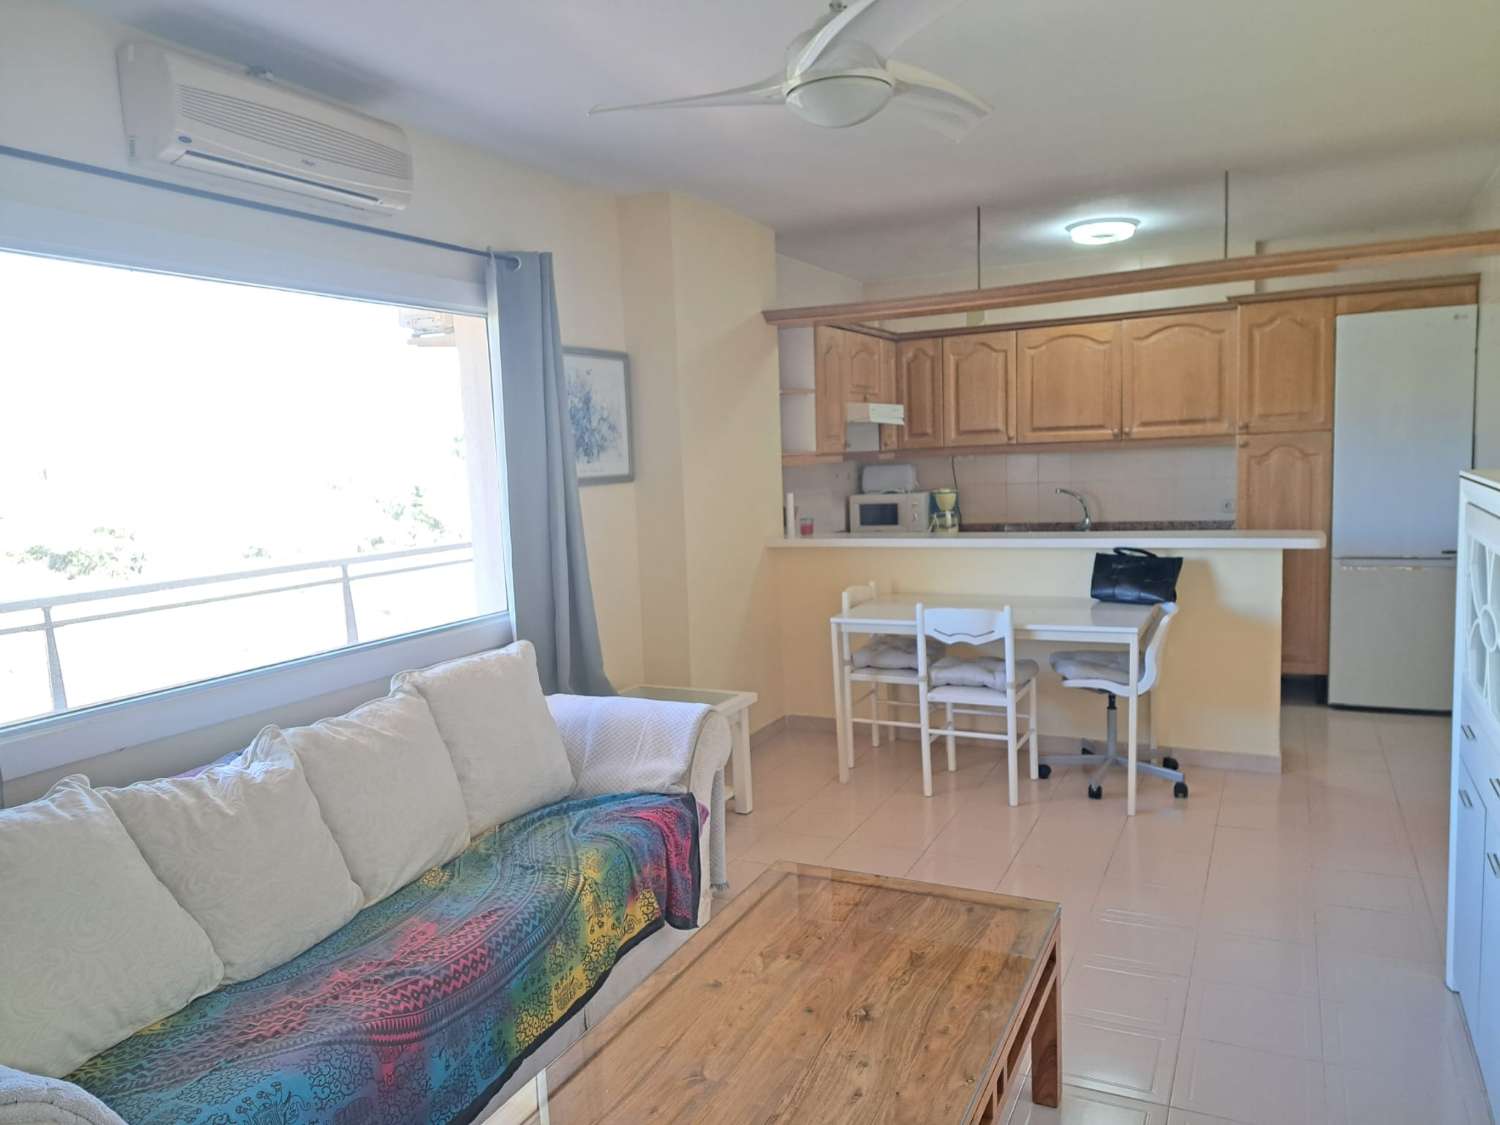 Apartment for sale in front of the golf course